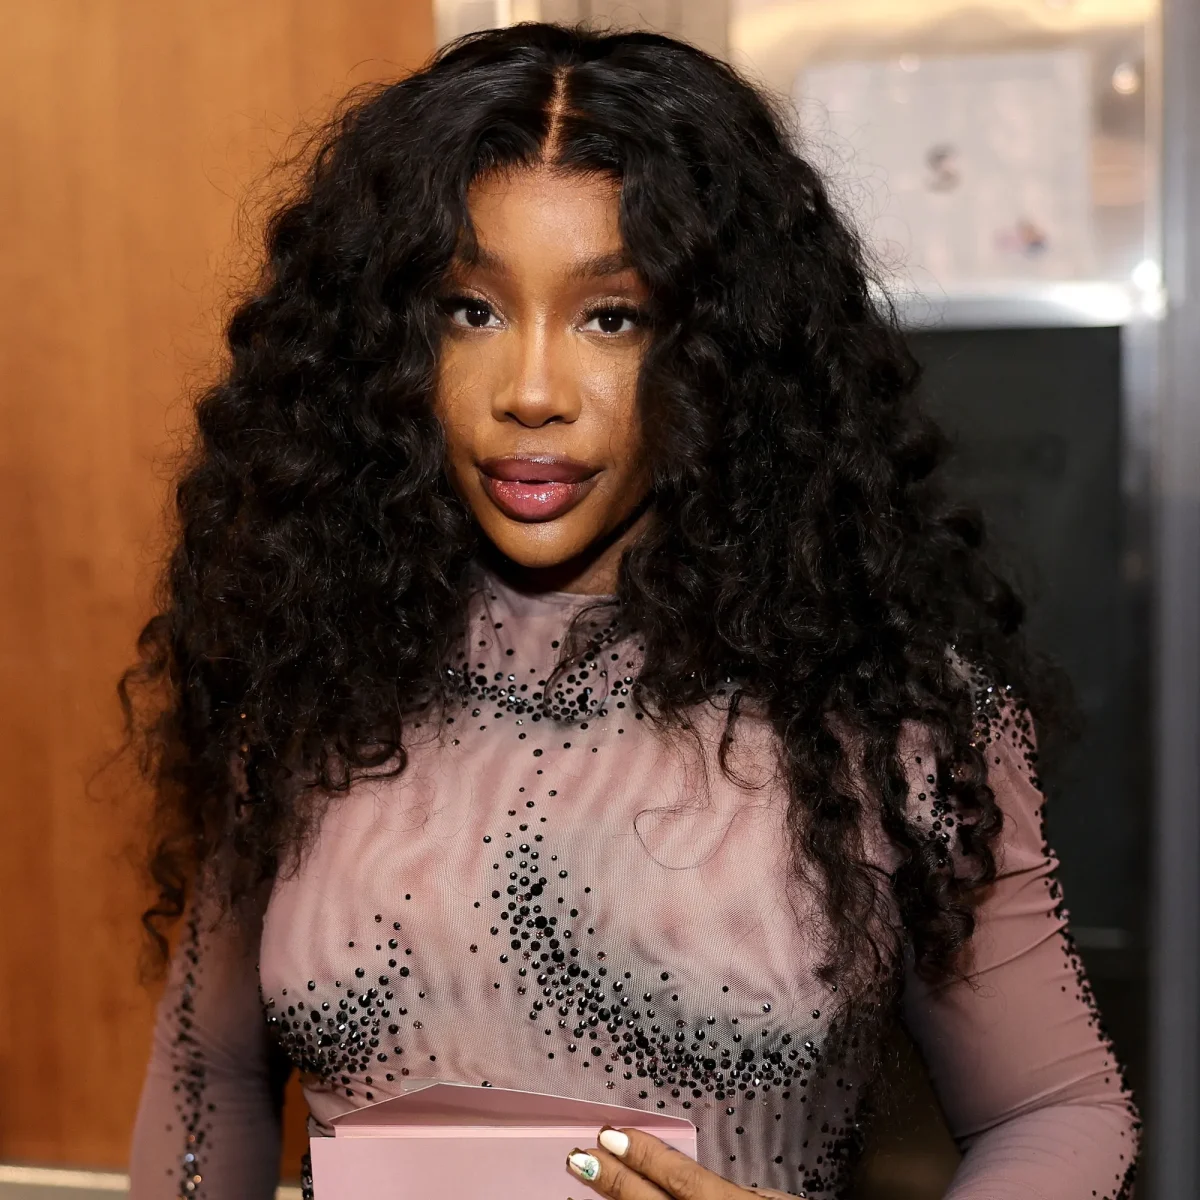 Sza Reacts To Fans' Unruly Behavior At Her Aussie Concert 4